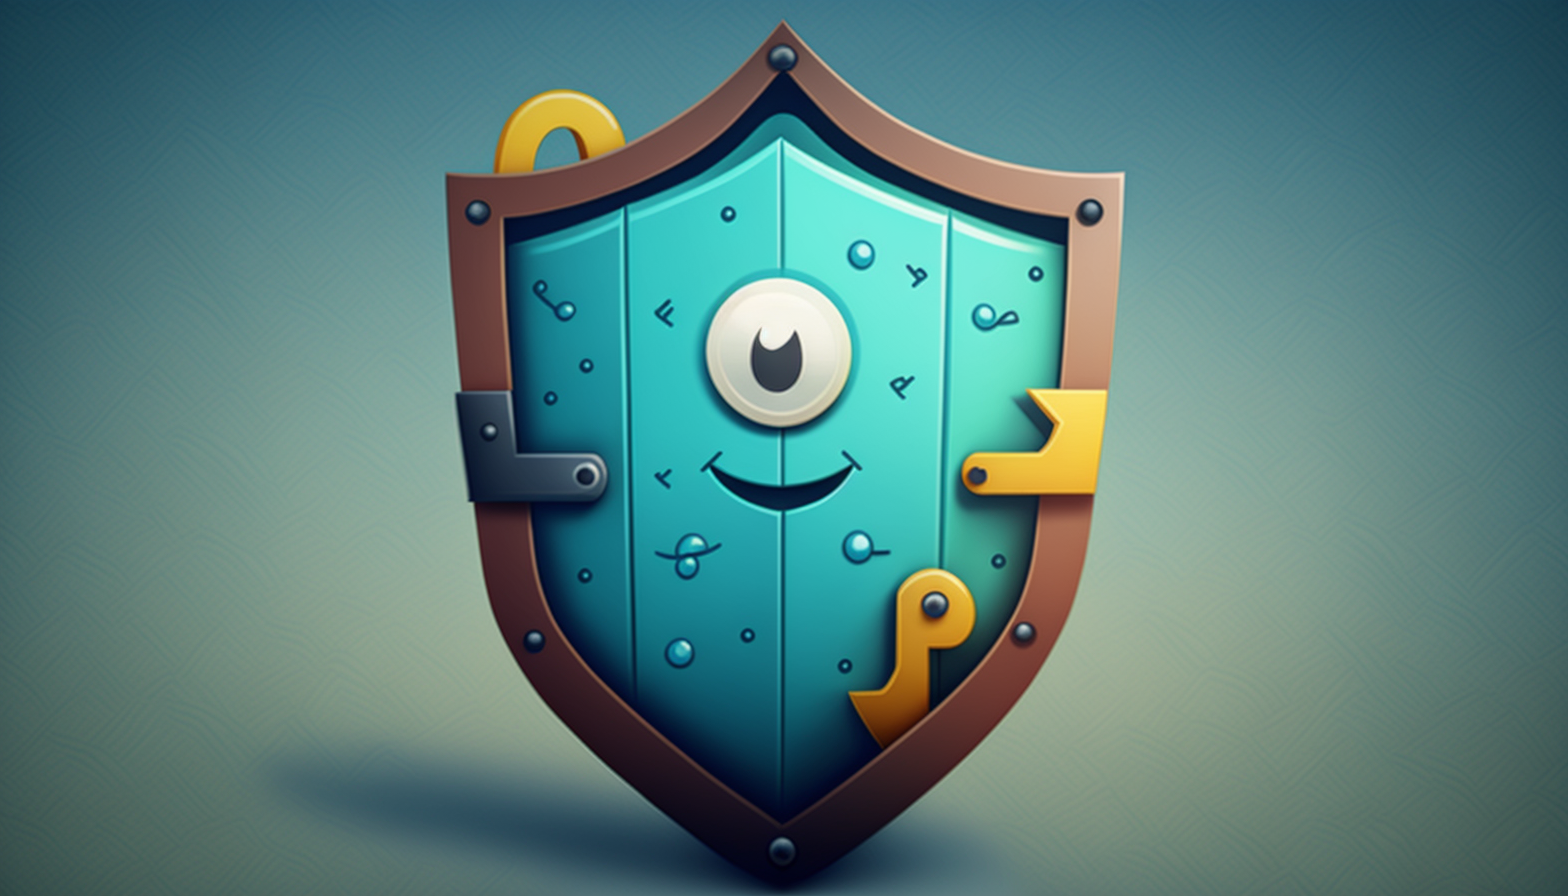 A cartoon shield with a padlock in the center, representing the idea of defending against social engineering attacks in cybersecurity